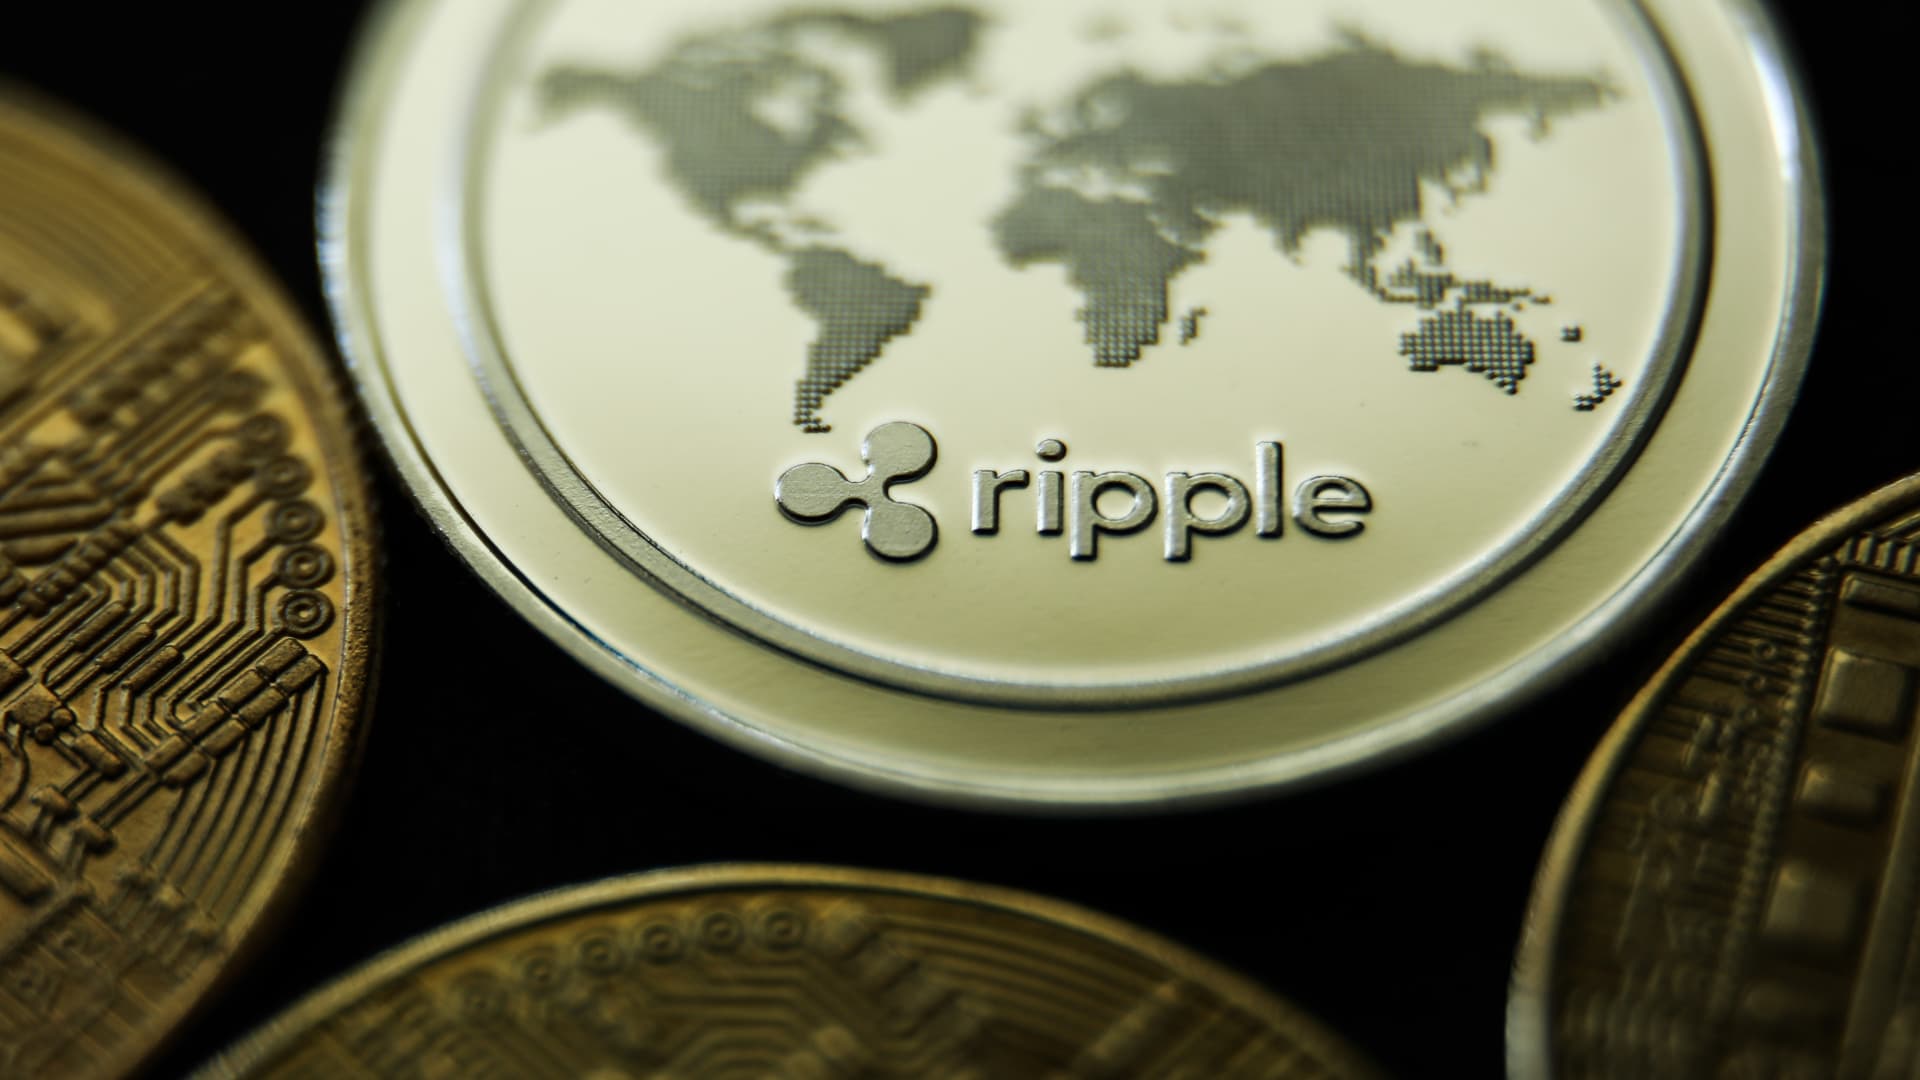 Ripple to launch U.S. dollar stablecoin, taking on a 0 billion market dominated by Tether, Circle